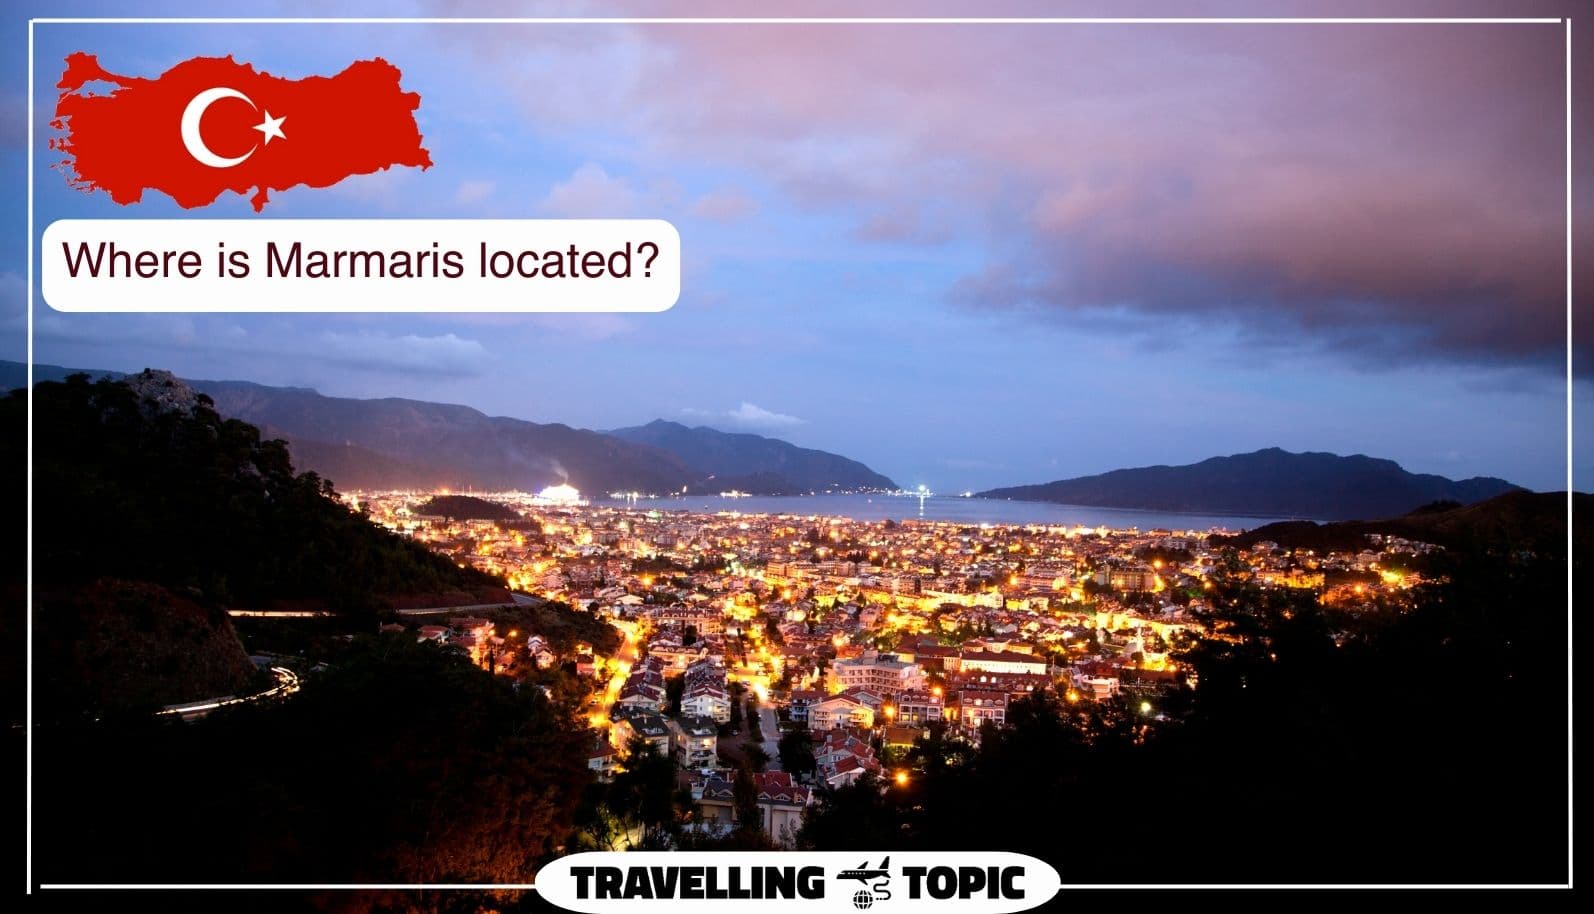 Where is Marmaris located